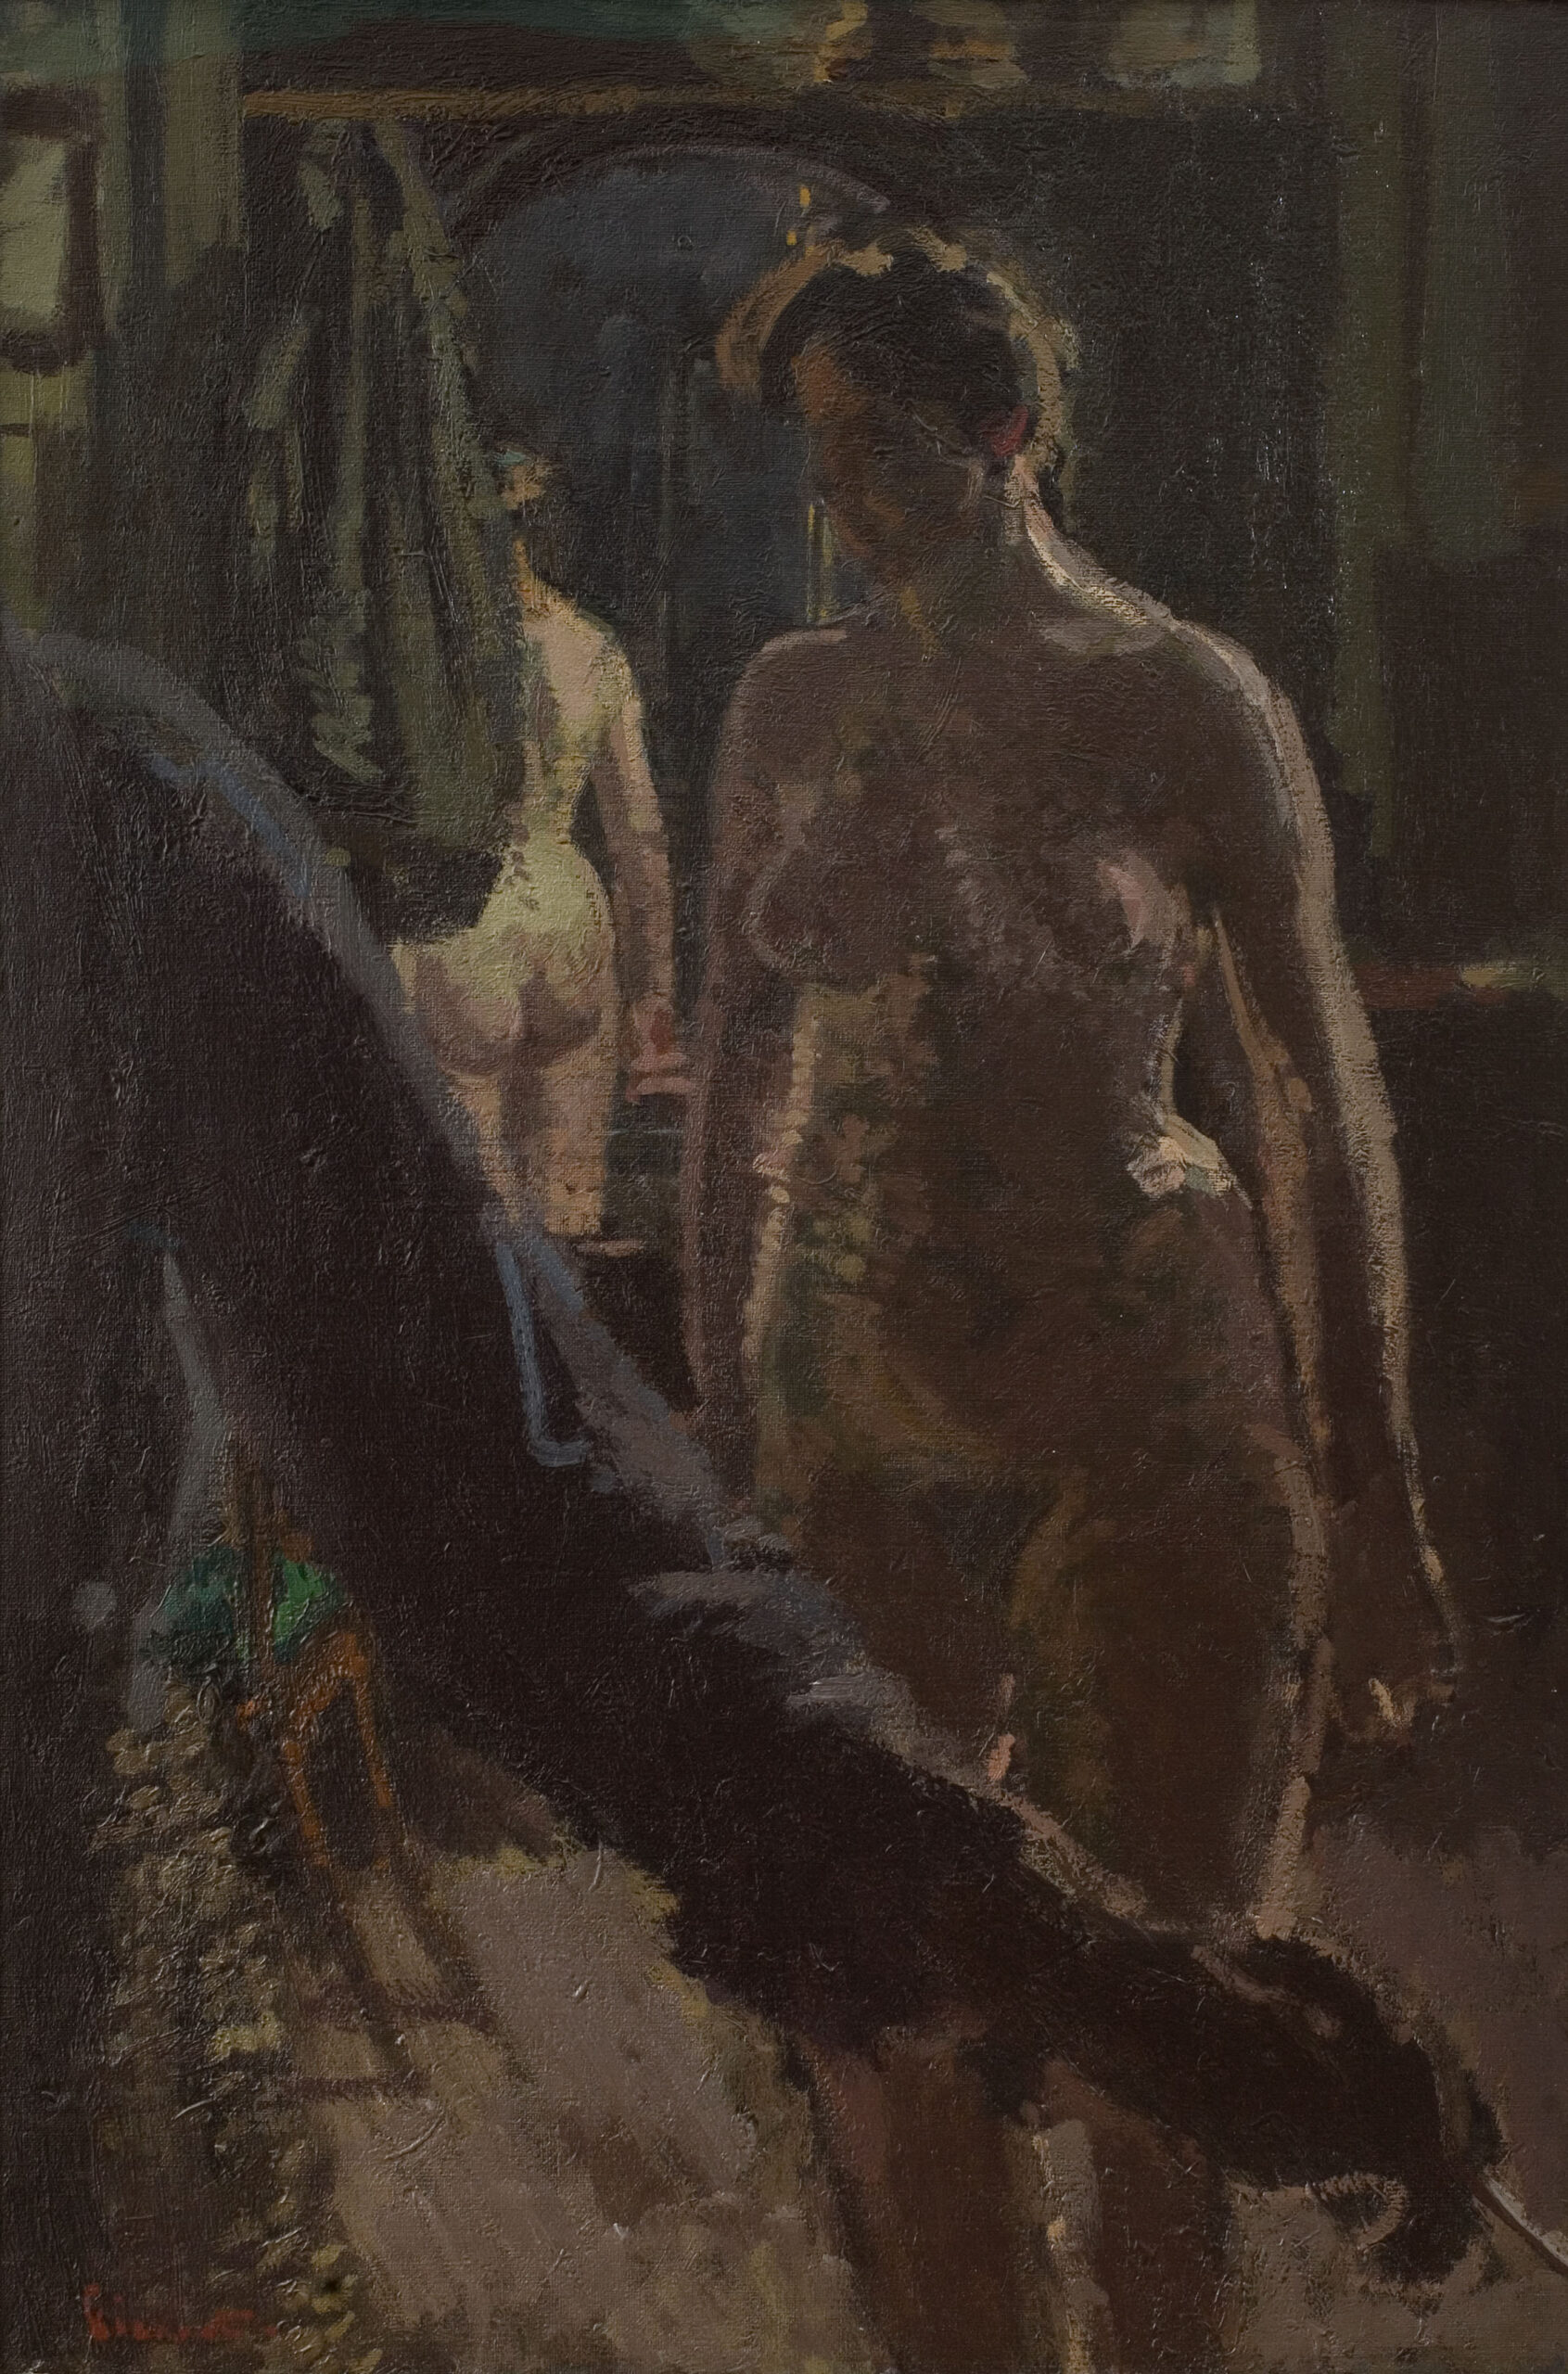 Walter Richard Sickert, The Studio: the Painting of a Nude, c. 1906, Piano Nobile Property of an European Collector. Image courtesy of PIANO NOBILE Robert Travers (Works of Art) Ltd. Sur les réseaux sociaux mentionner : @pianonobilegallery